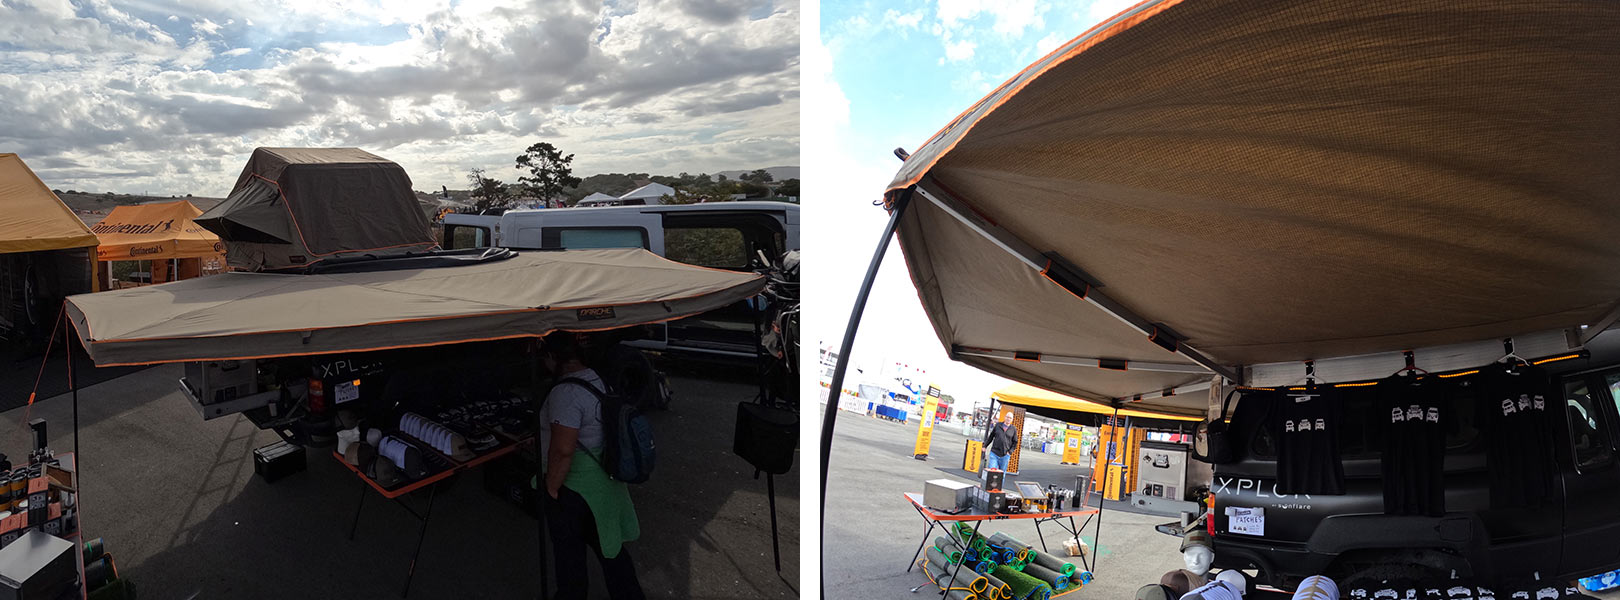 GTFO overland supplies and darche rooftop tents and vehicle canopies for car camping